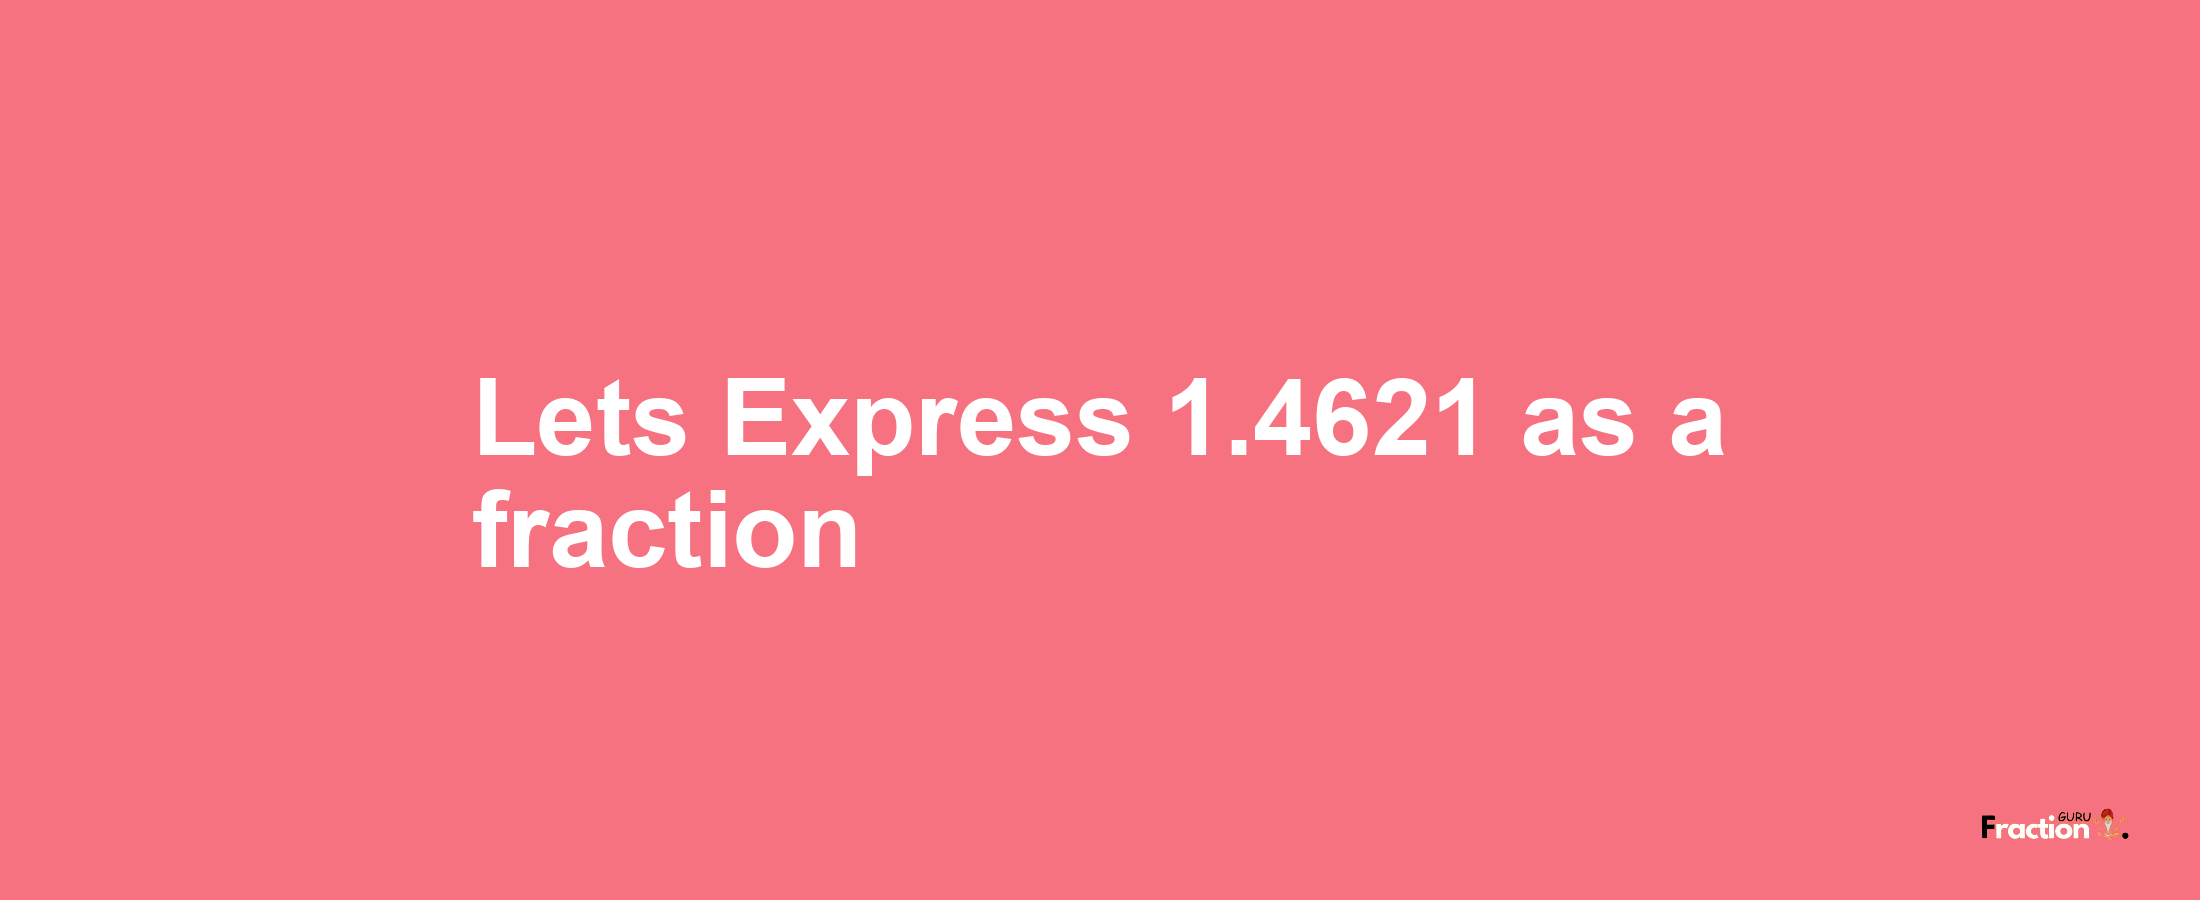 Lets Express 1.4621 as afraction